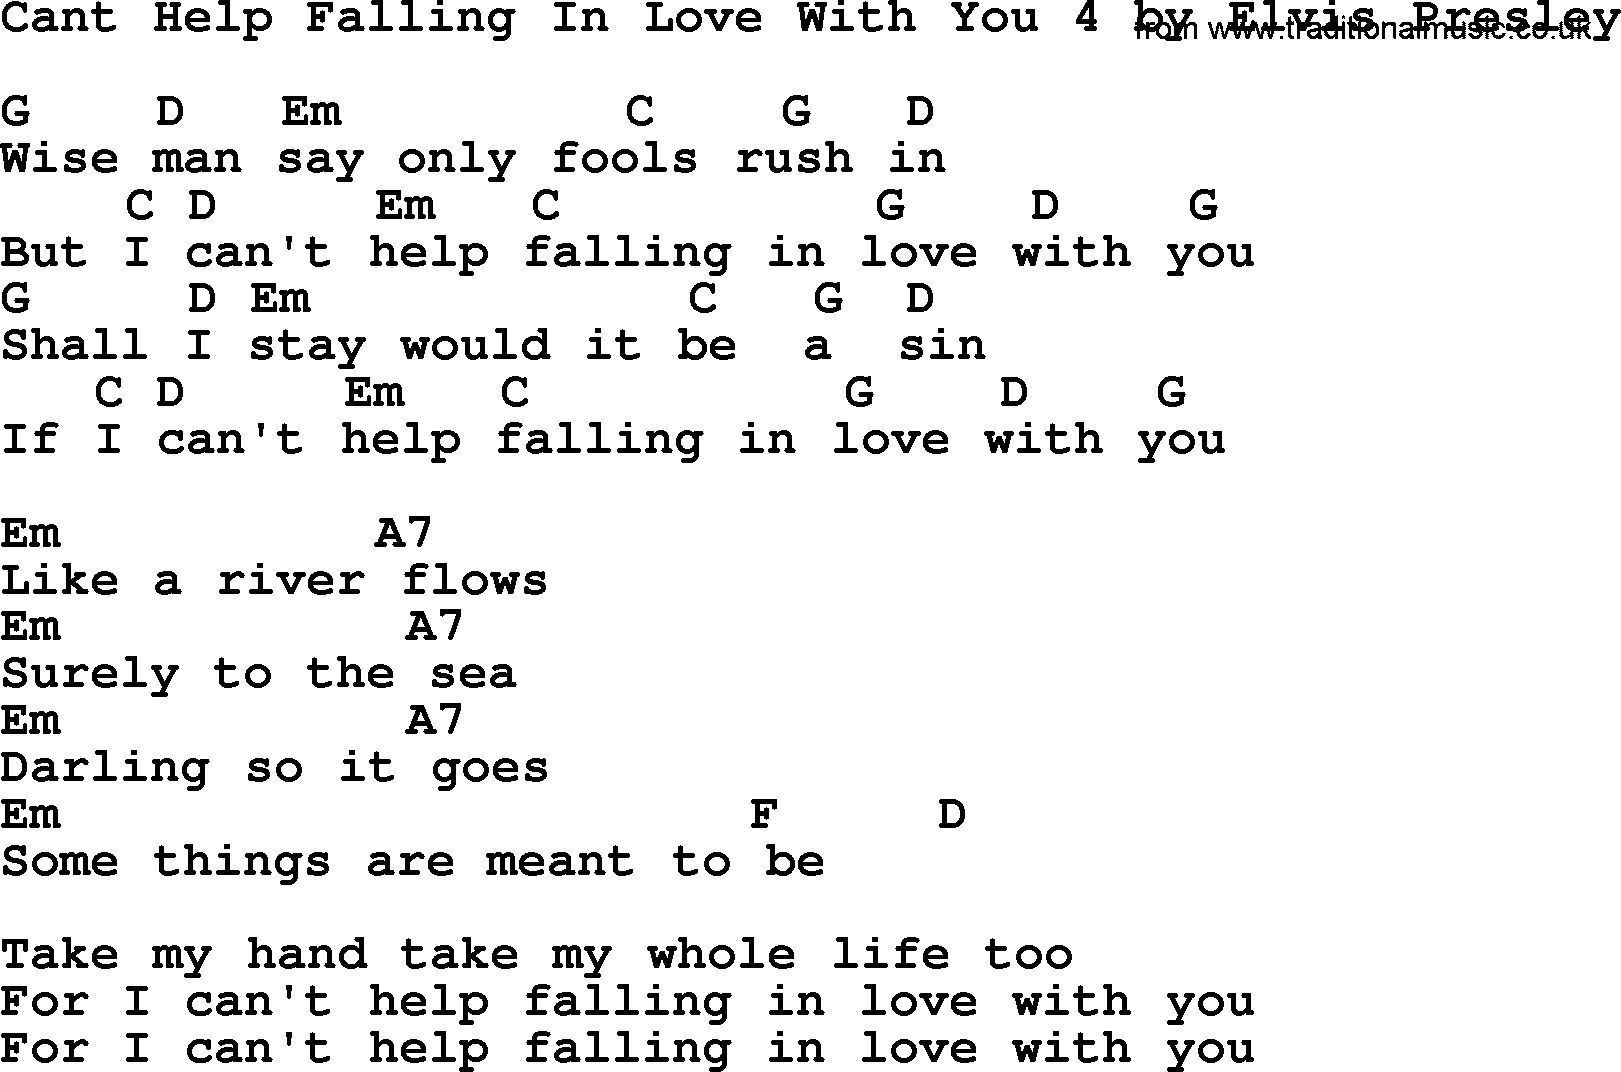 Elvis Presley song: Cant Help Falling In Love With You 4, lyrics and chords